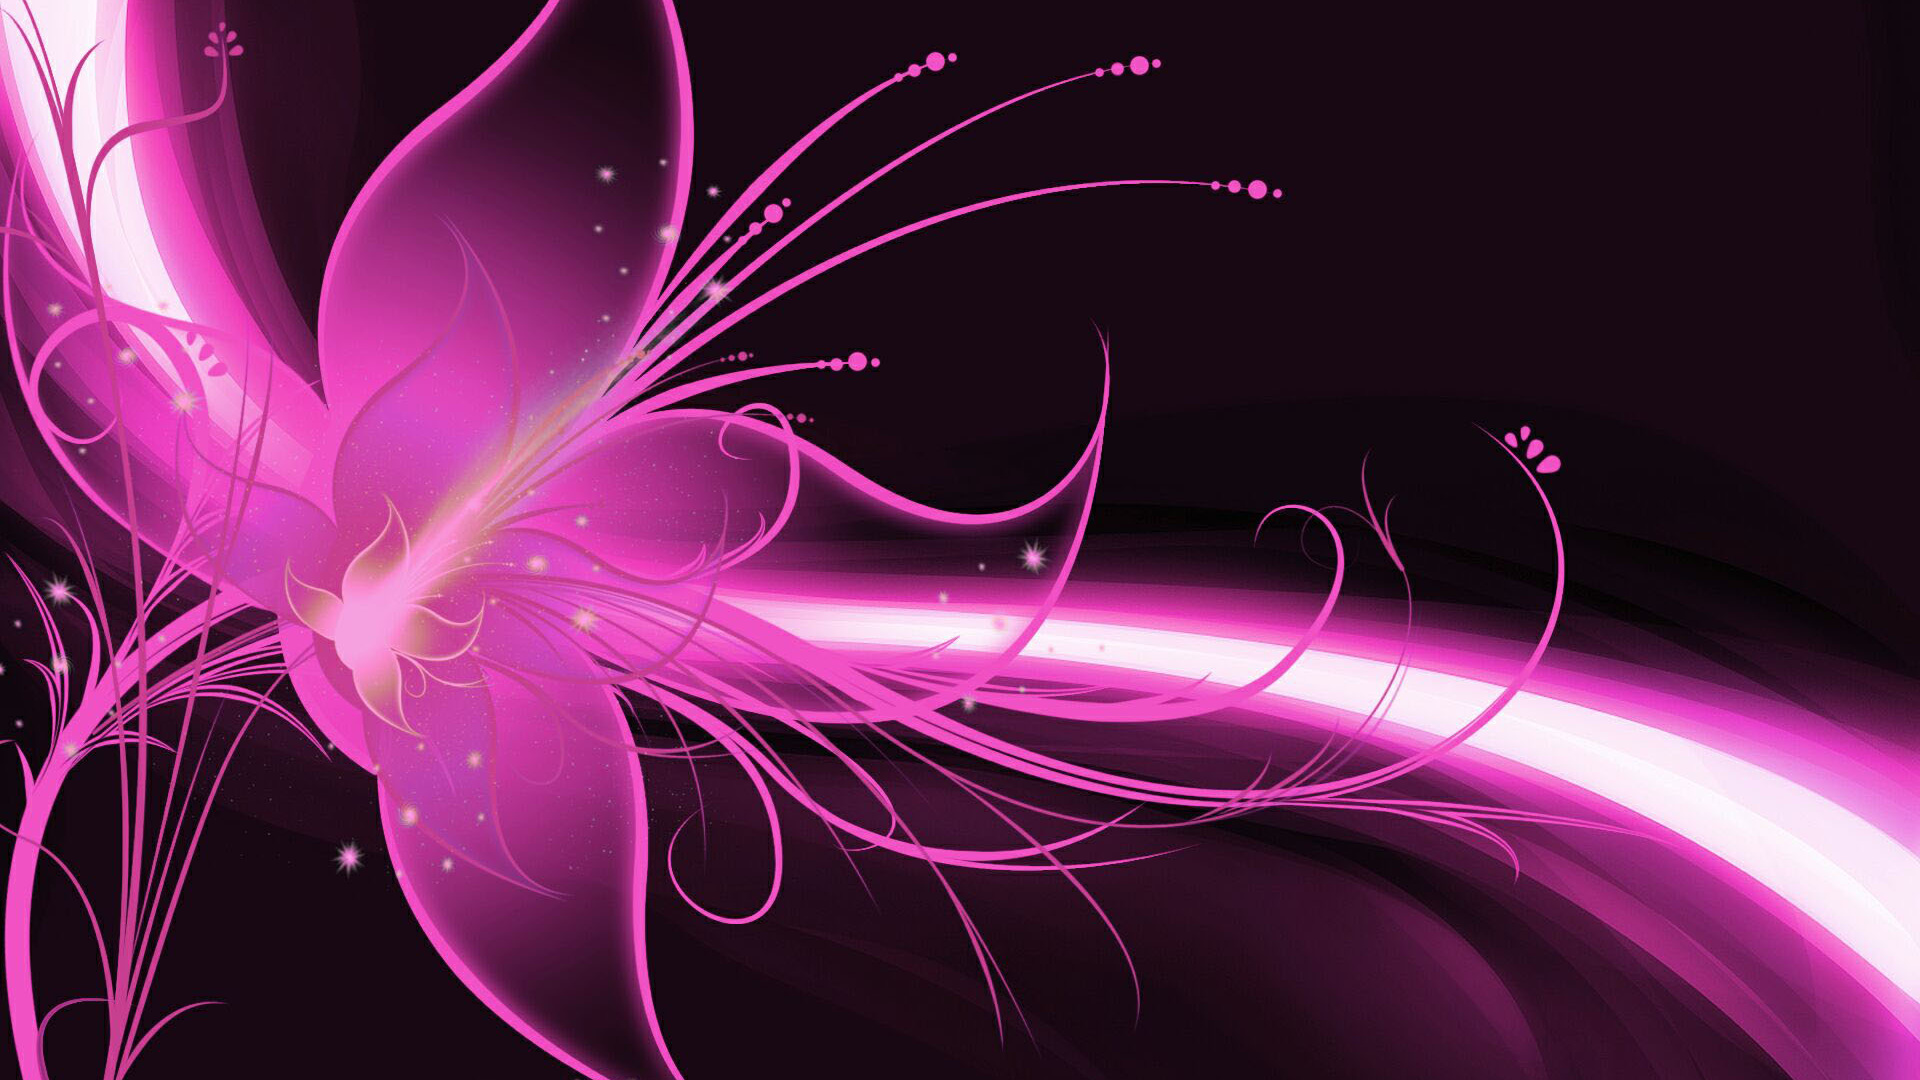 Purple and White Light Illustration. Wallpaper in 1920x1080 Resolution